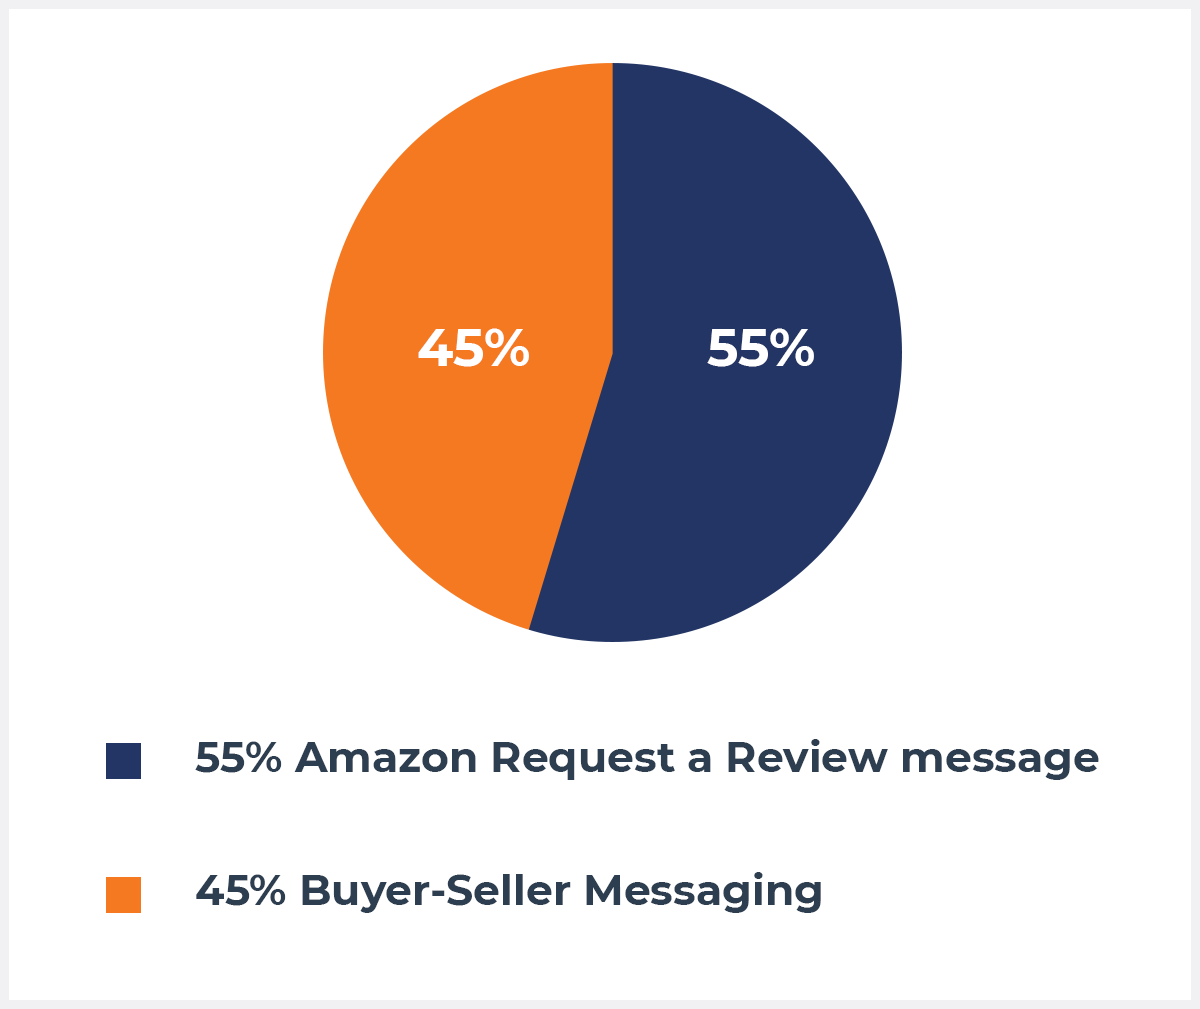 Graph showing the percentage of sellers who use Amazon's Request a Review message compared to Buyer-Seller Messaging